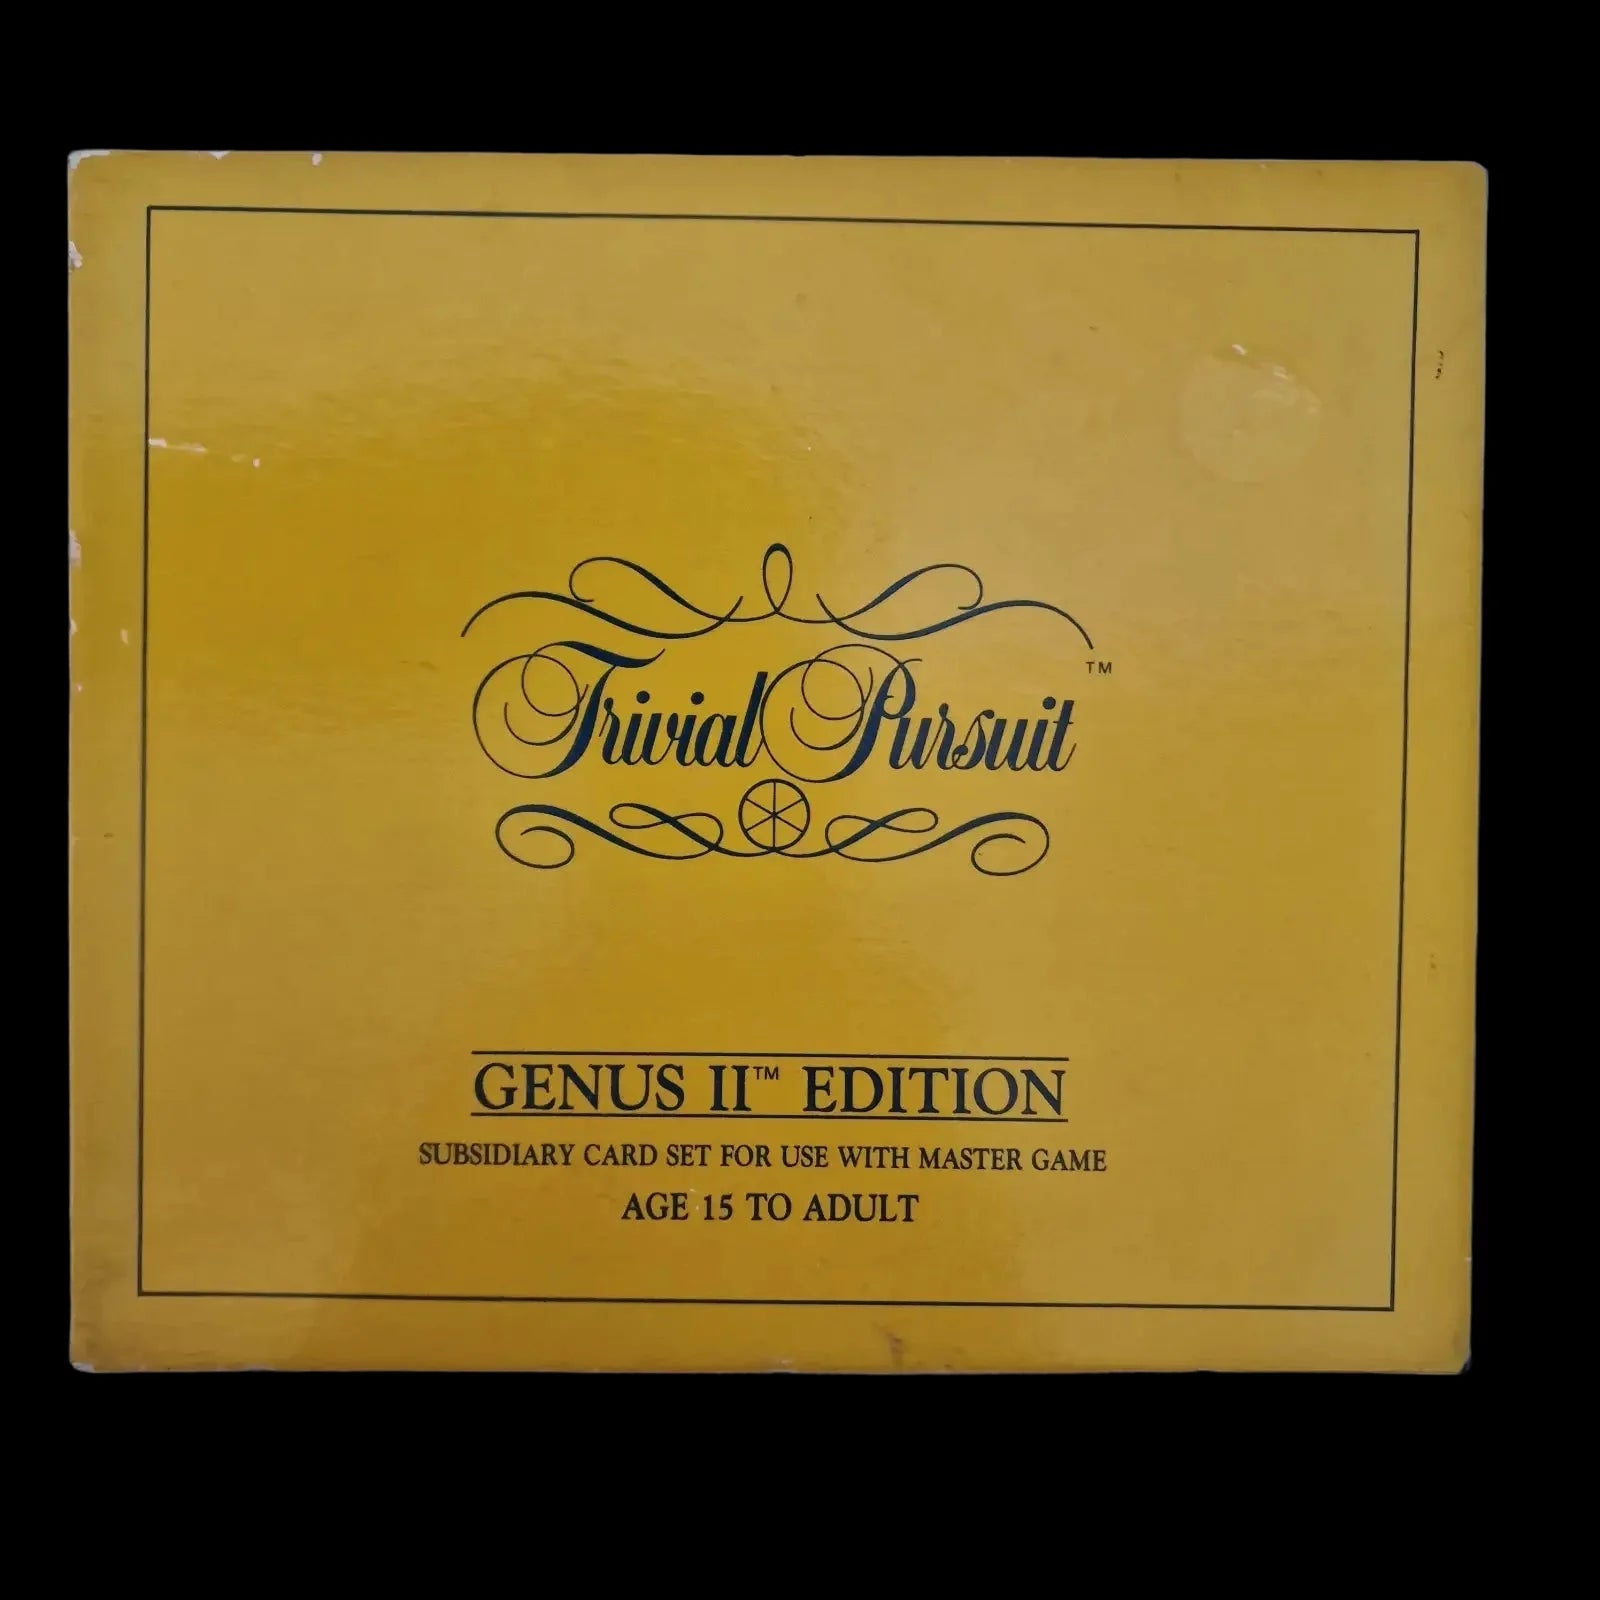 Boxed Trivial Pursuit Genus Ii Edition Subsidiary Card Set